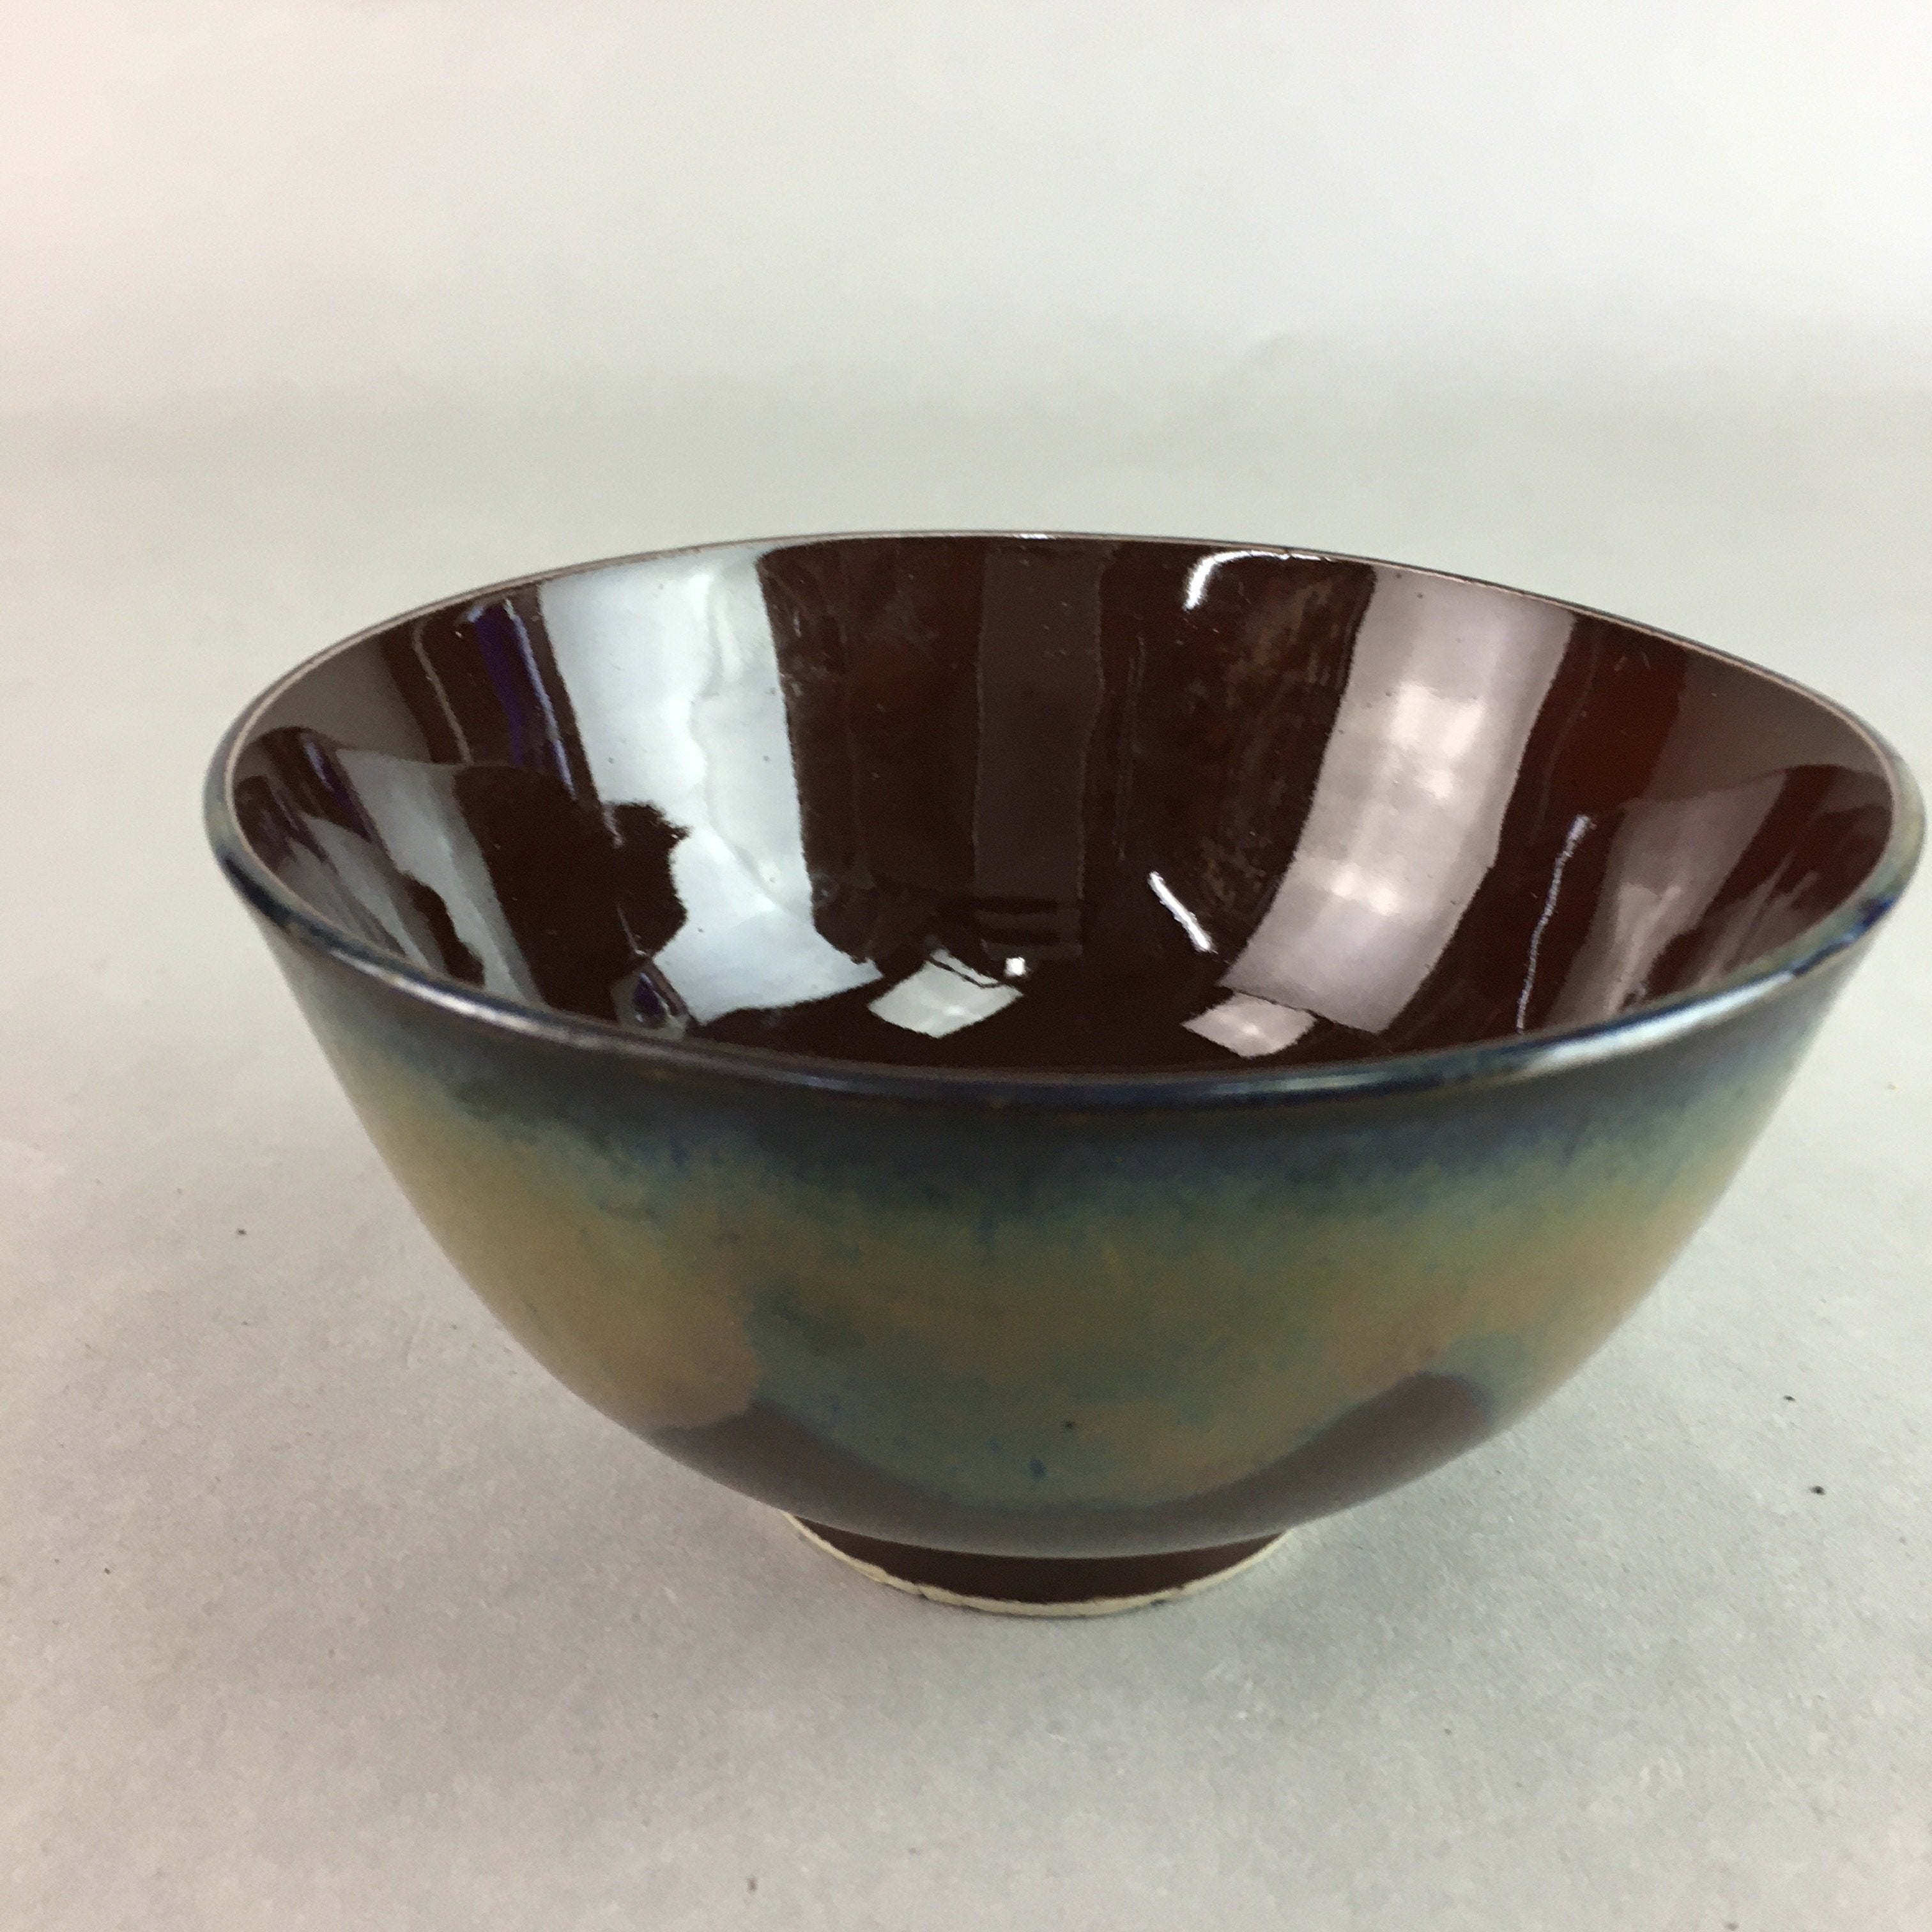 Japanese Porcelain Rice Bowl Vtg Chawan Brown Shiny Smooth Flowing Glaze PP301